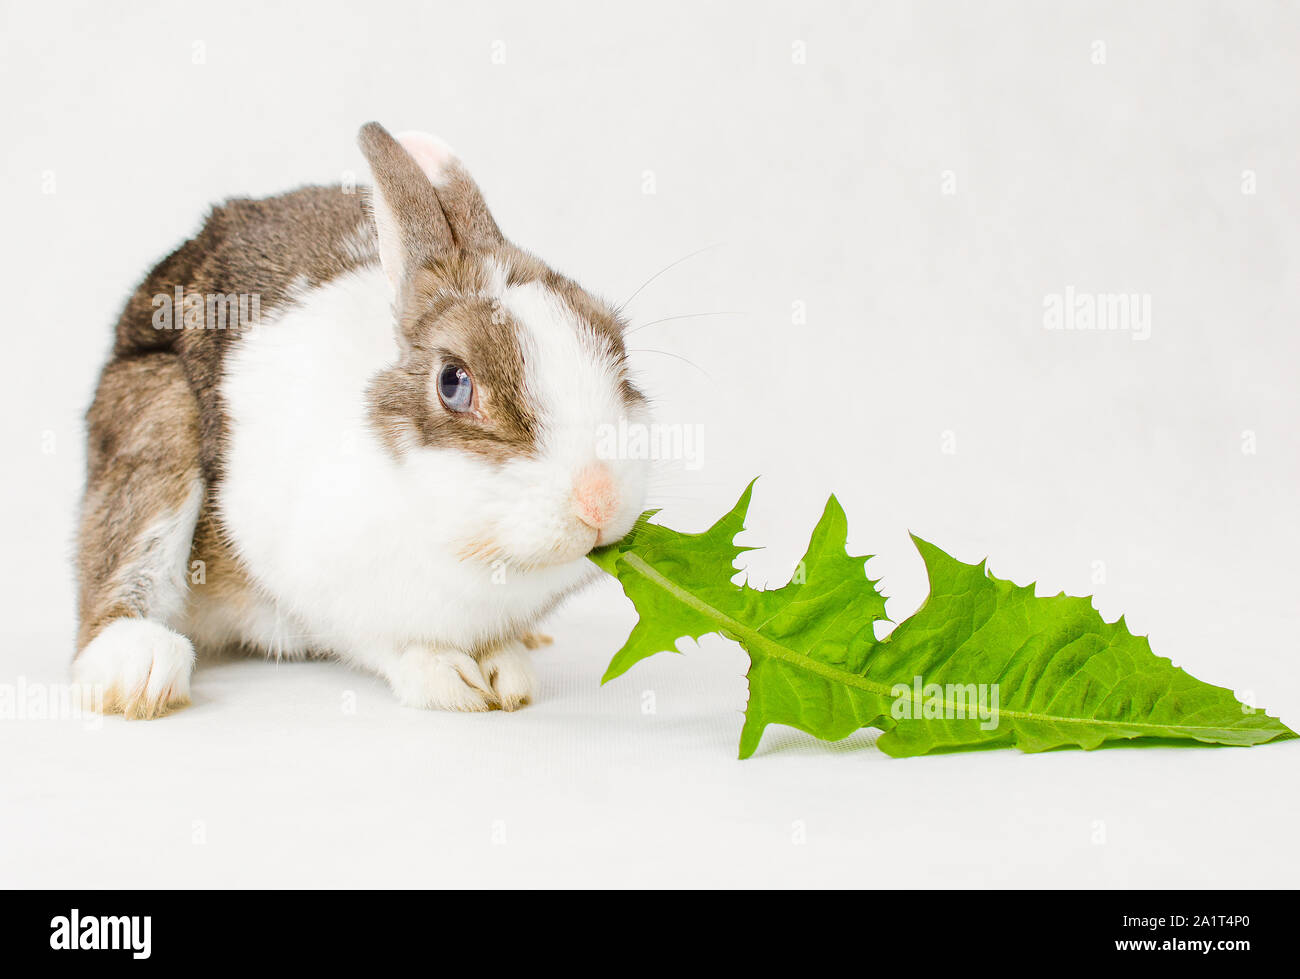 Grey and white dwarf rabbit with blue eyes eating green sappy dandelion leaf on white background Stock Photo